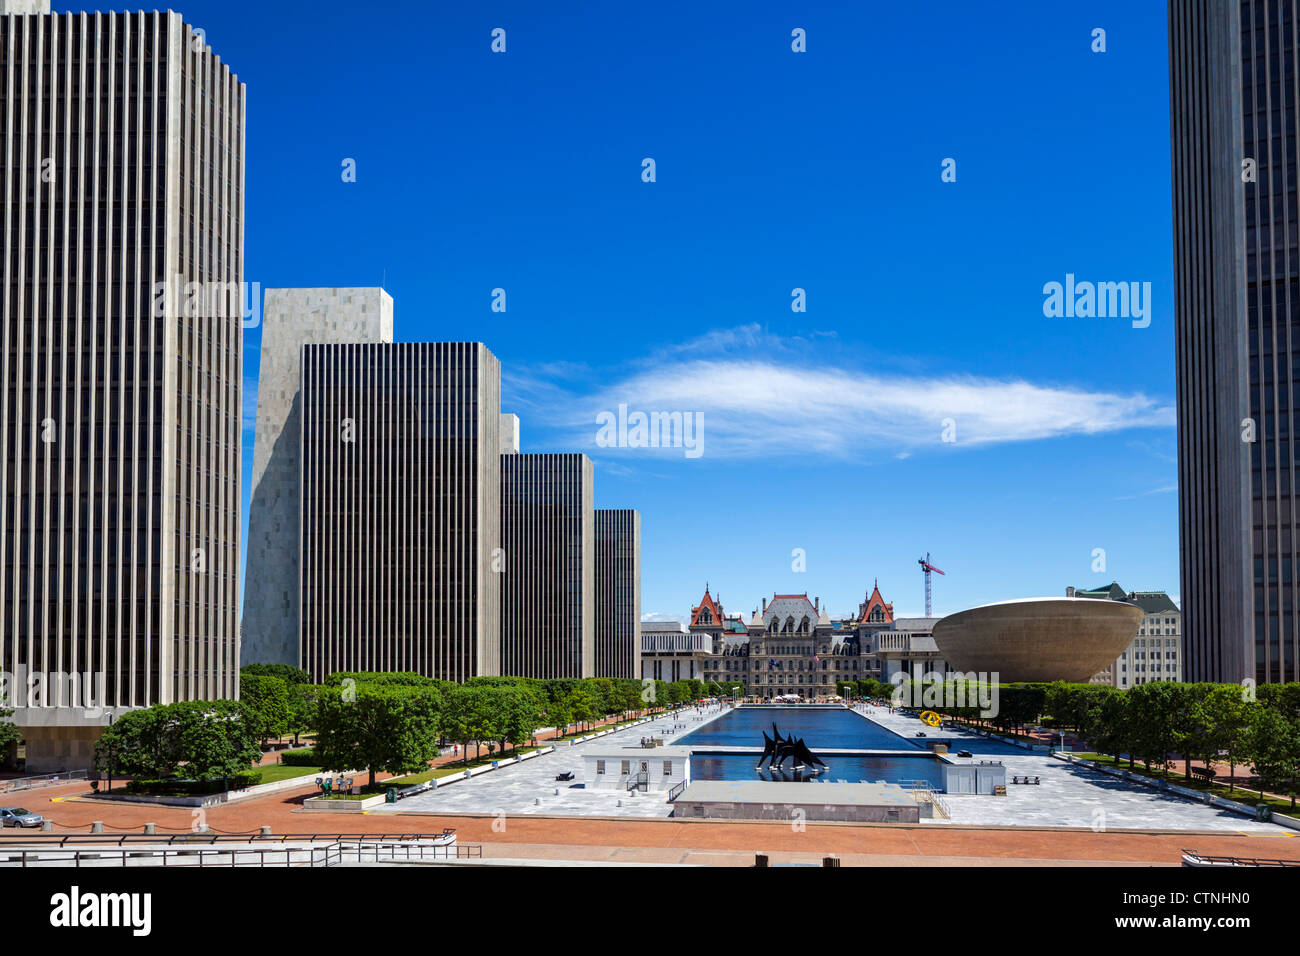 The Nelson A Rockefeller Empire State Plaza looking towards State Capitol with 'The Egg' to right, Albany, New York State, USA Stock Photo